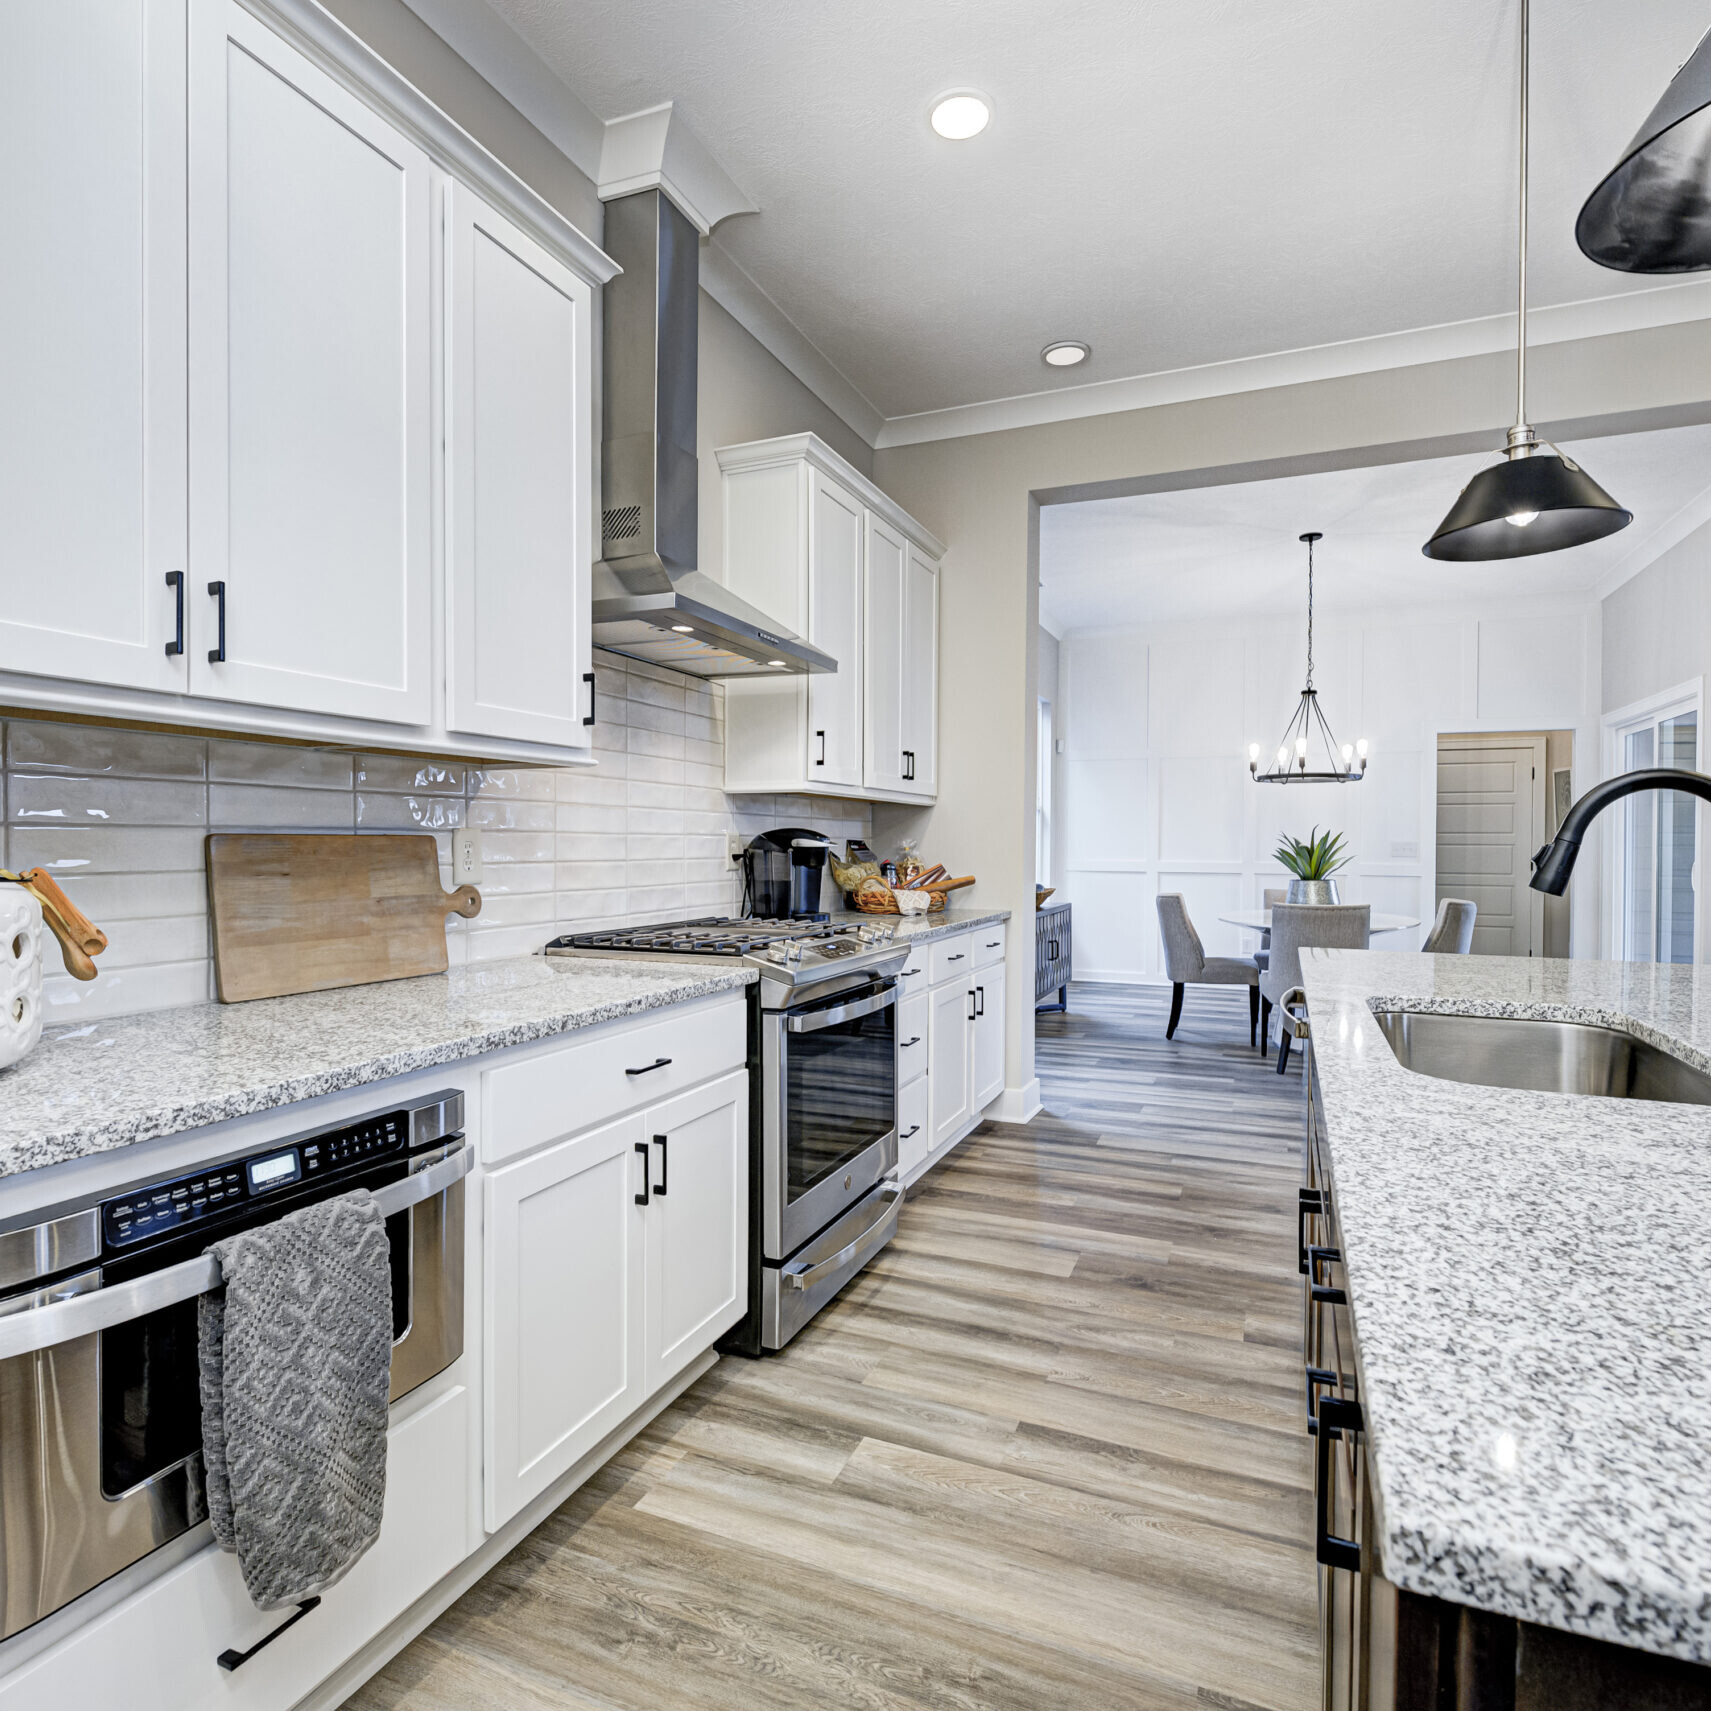 A white kitchen with stainless steel appliances and granite counter tops, custom-built by a reputable home builder in Carmel, Indiana.